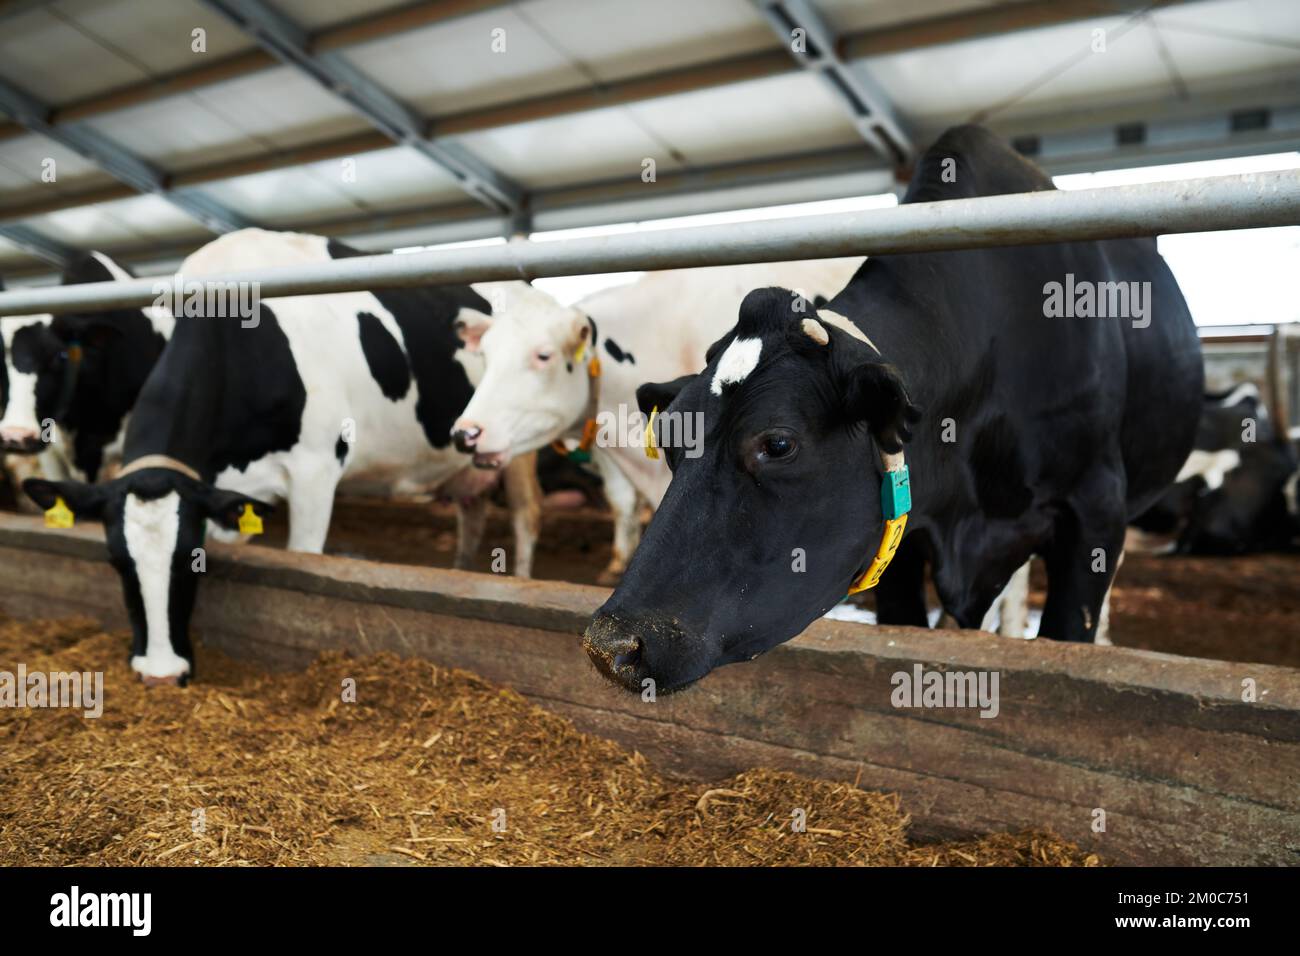 Row of black-and-white milk cows standing in cowshed of huge modern livestock farm and eating special fodder from feeder Stock Photo